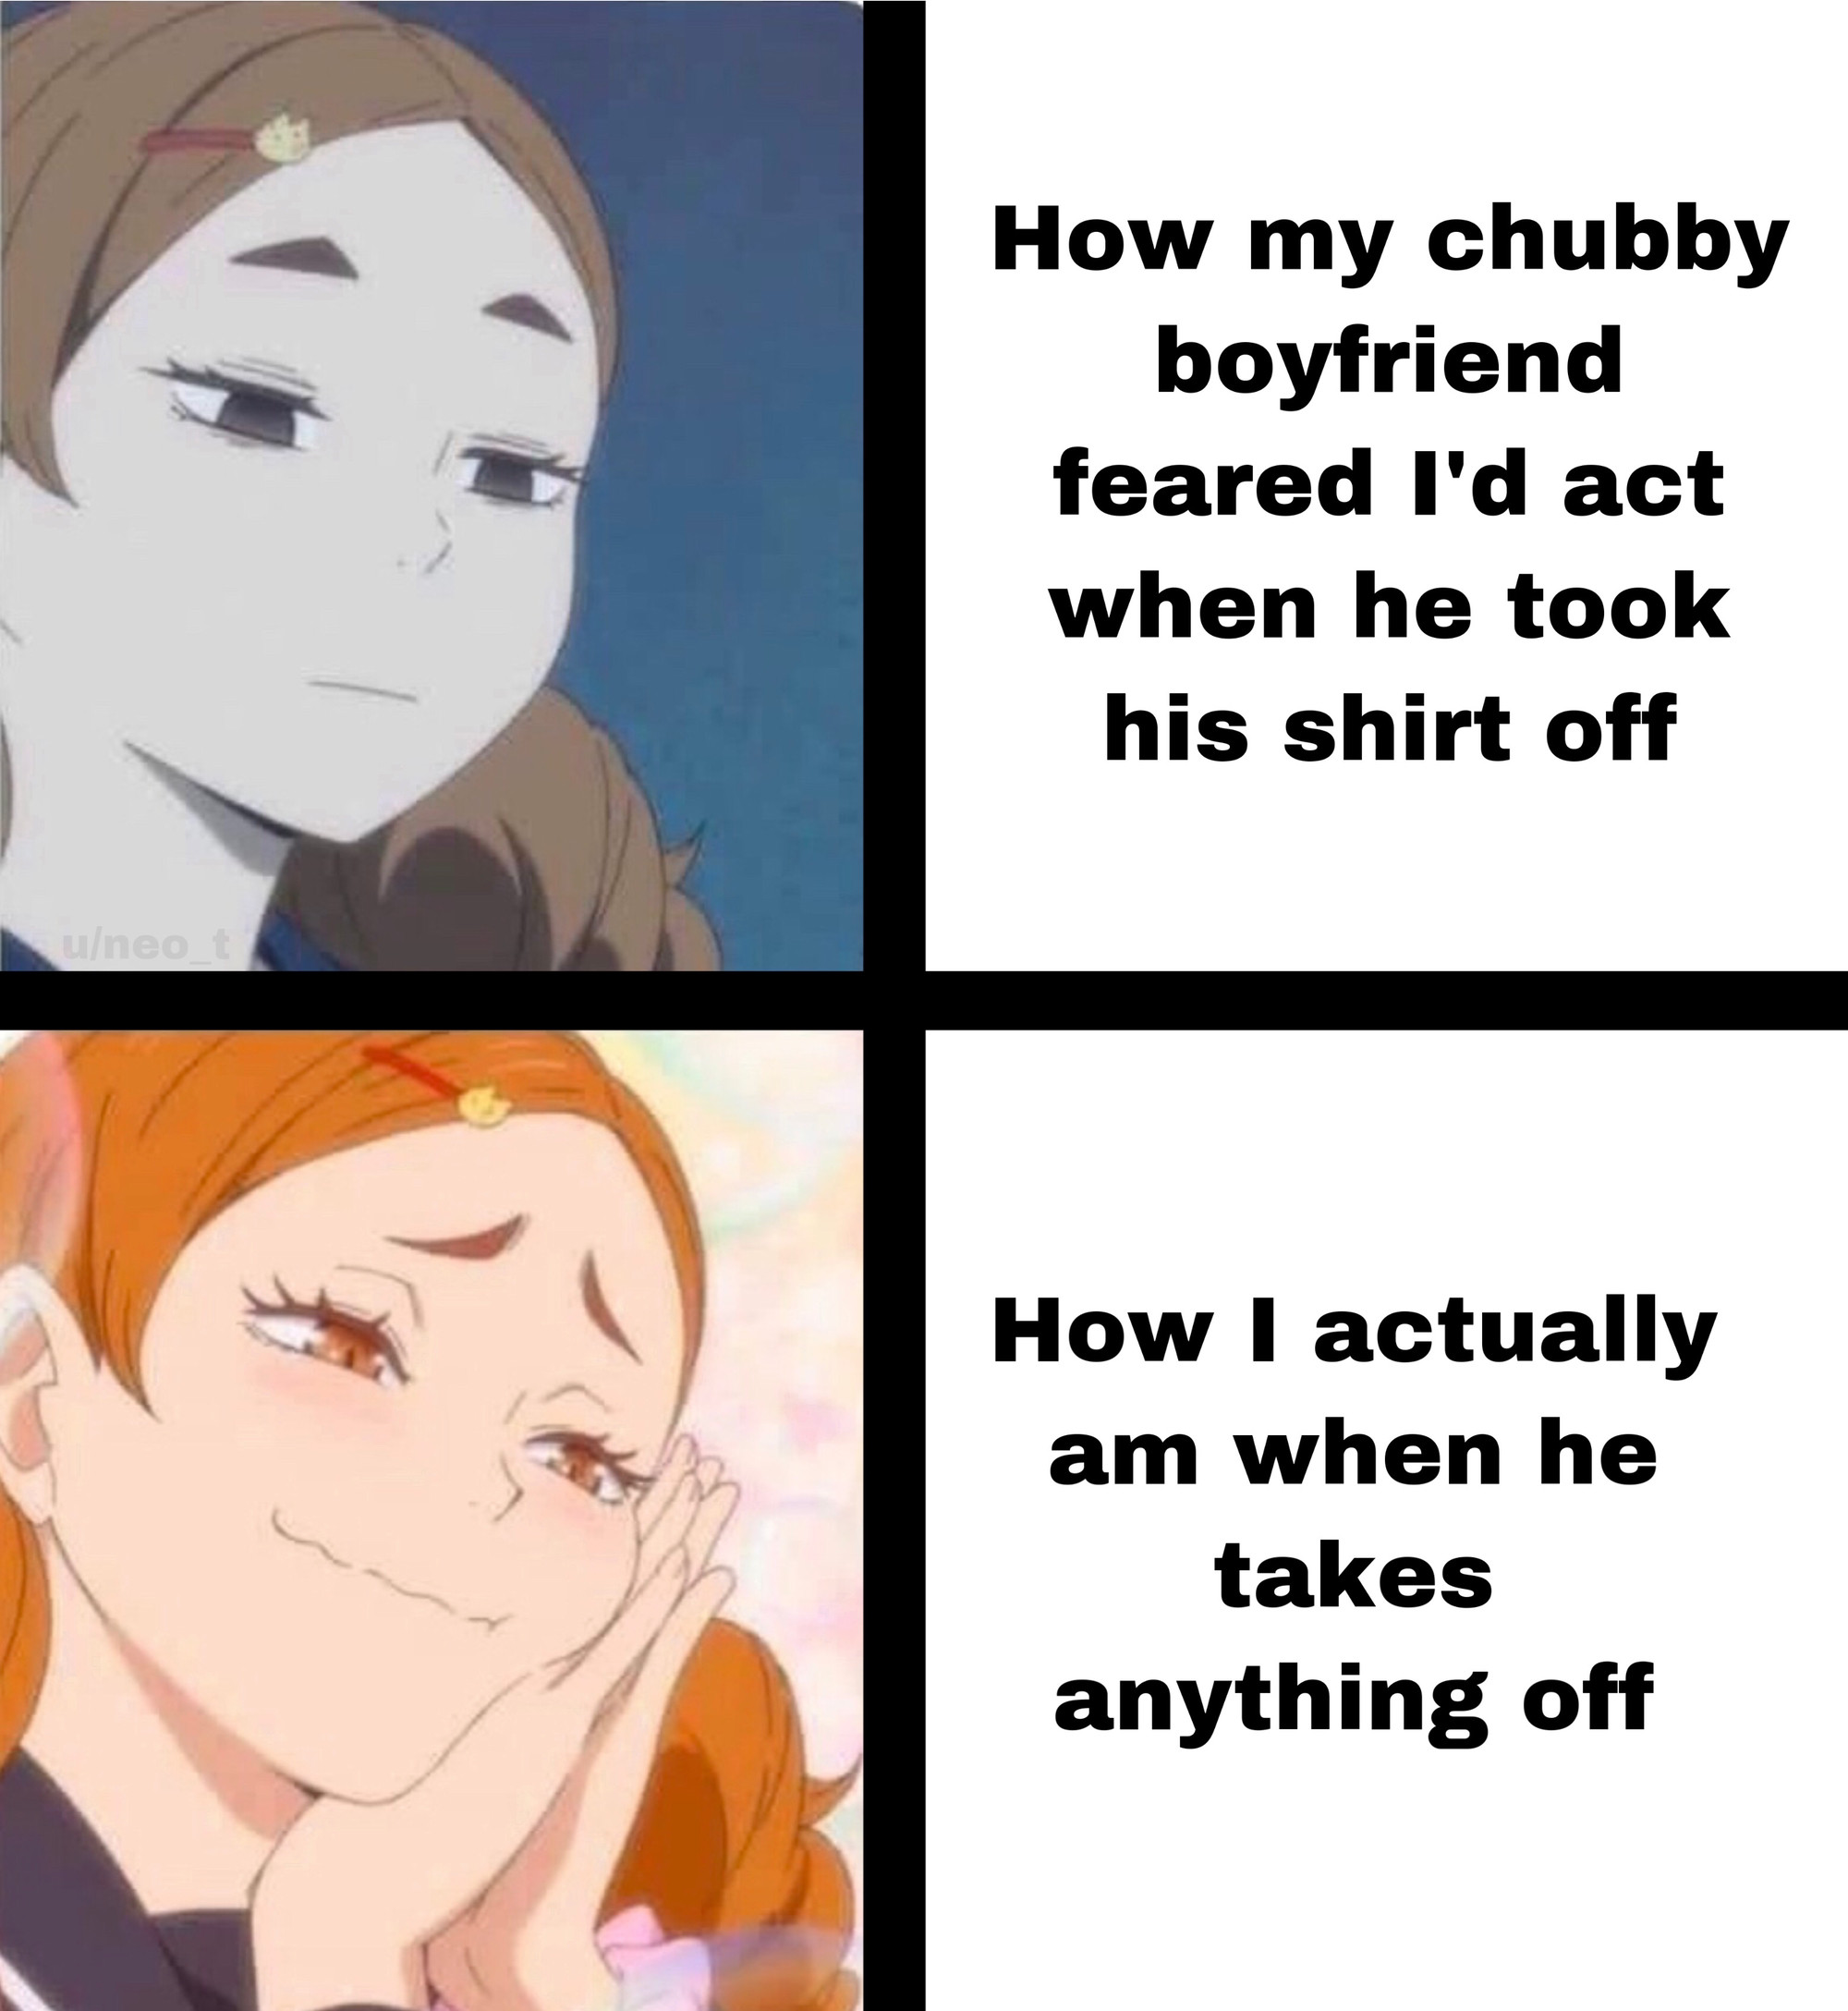 Internet meme - How my chubby boyfriend feared I'd act when he took his shirt off How I actually am when he takes anything off